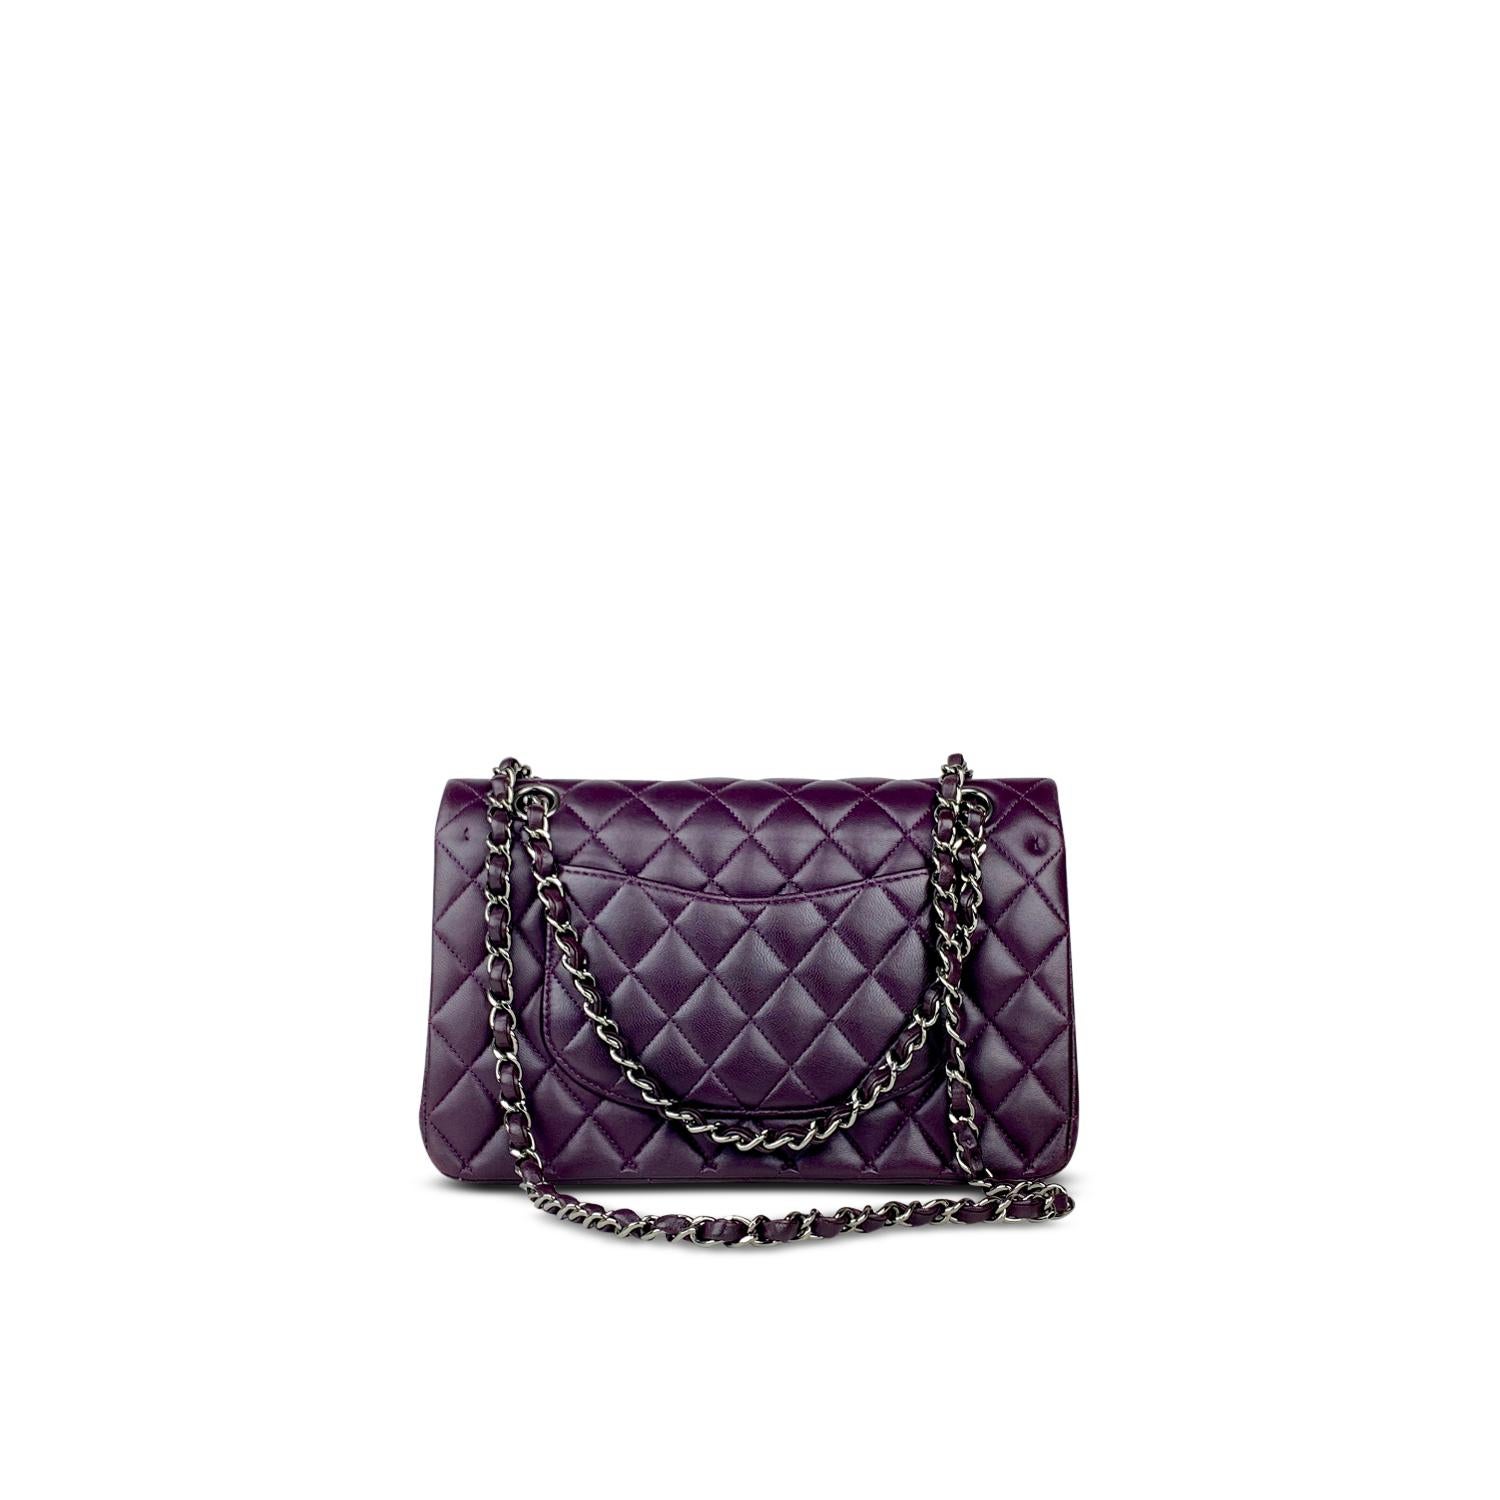 Chanel Medium Purple Classic/Timeless Double Flap Bag In Excellent Condition For Sale In Sundbyberg, SE